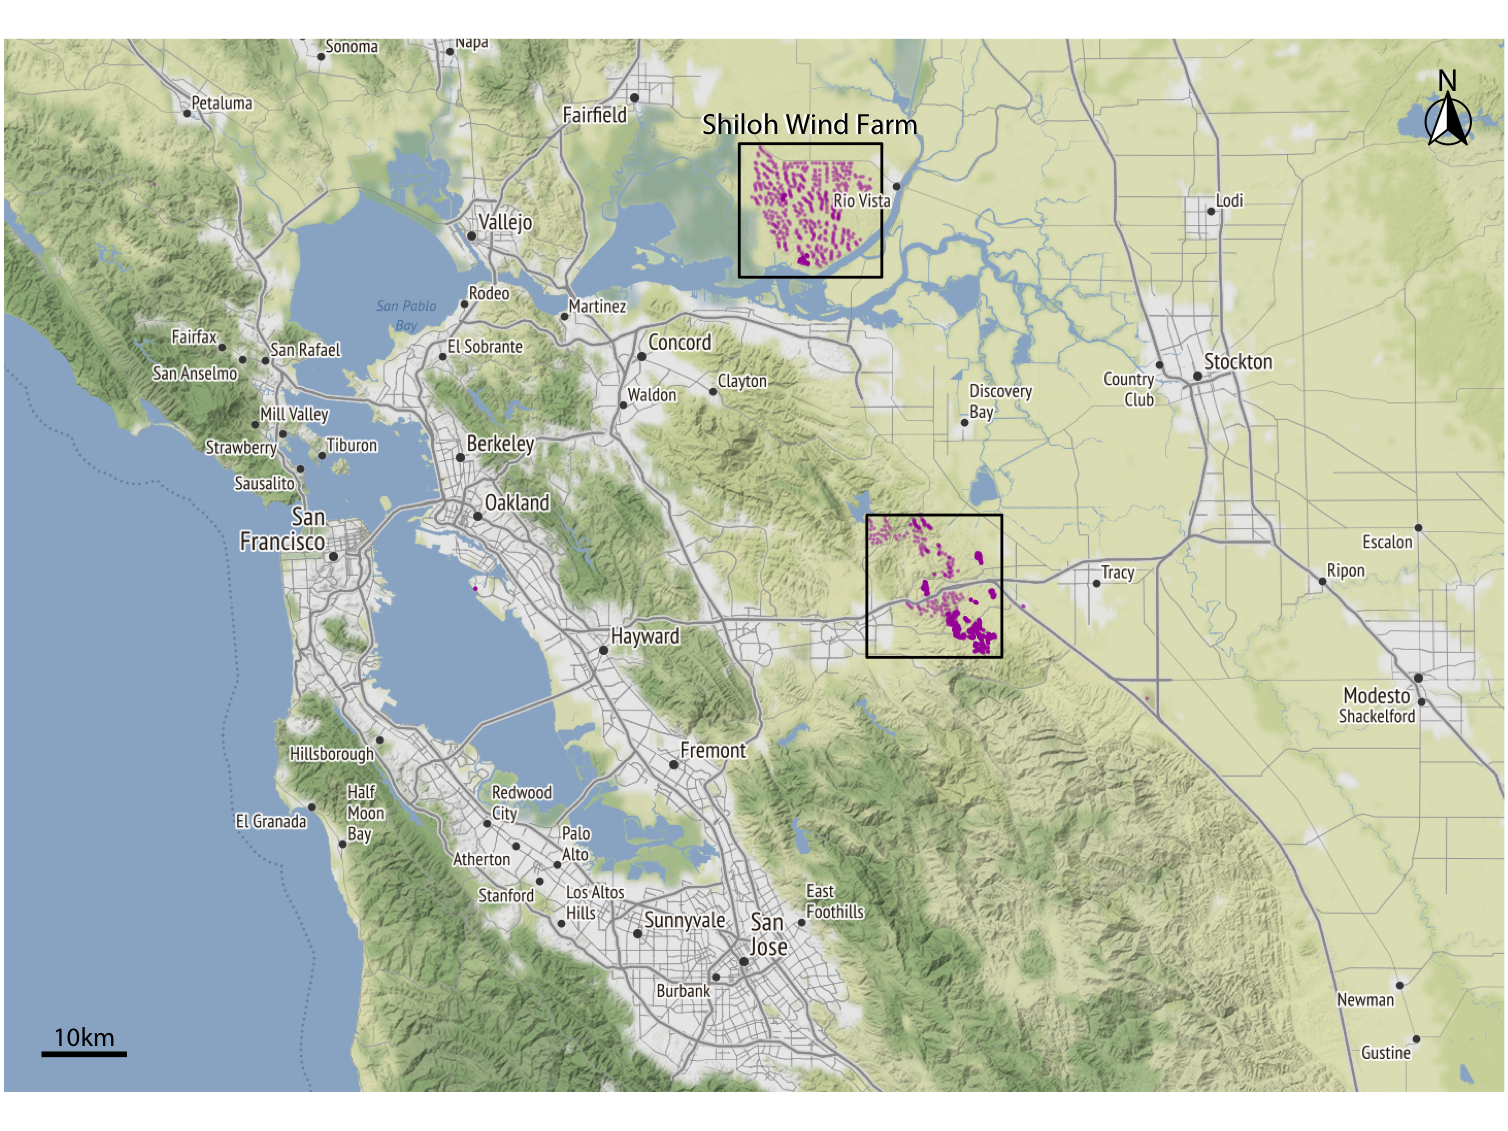 Wind turbines in the San Francisco Bay Area. Individual wind turbines are shown as purple-colored dots. Two regions with a high concentration of wind turbines are highlighted with black rectangles. I refer to the wind turbines near Rio Vista collectively as the Shiloh Wind Farm. Map tiles by Stamen Design, under CC BY 3.0. Map data by OpenStreetMap, under ODbL. Wind turbine data: United States Wind Turbine Database